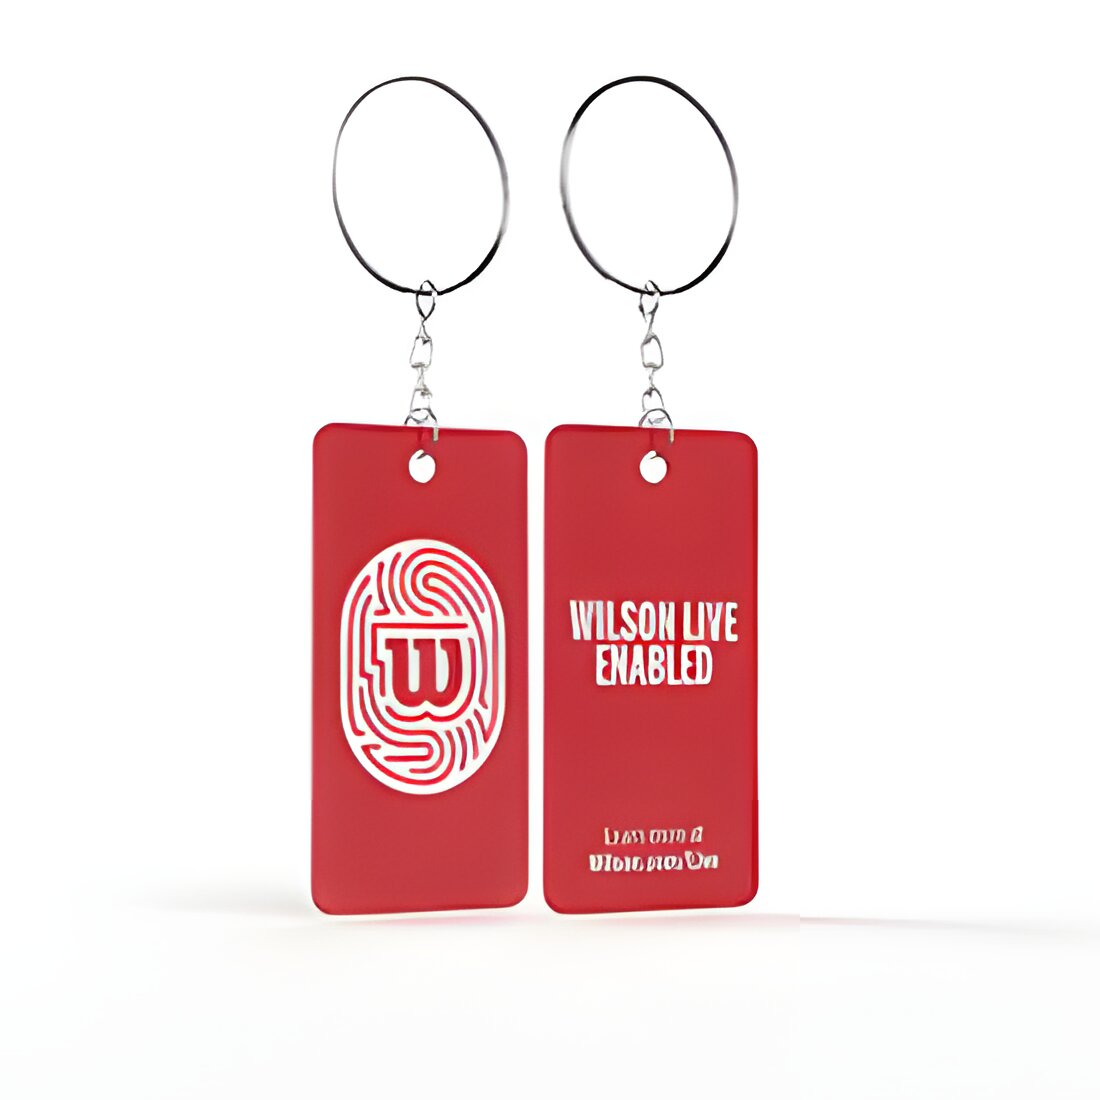 Free Wilson Live Enabled Keychain